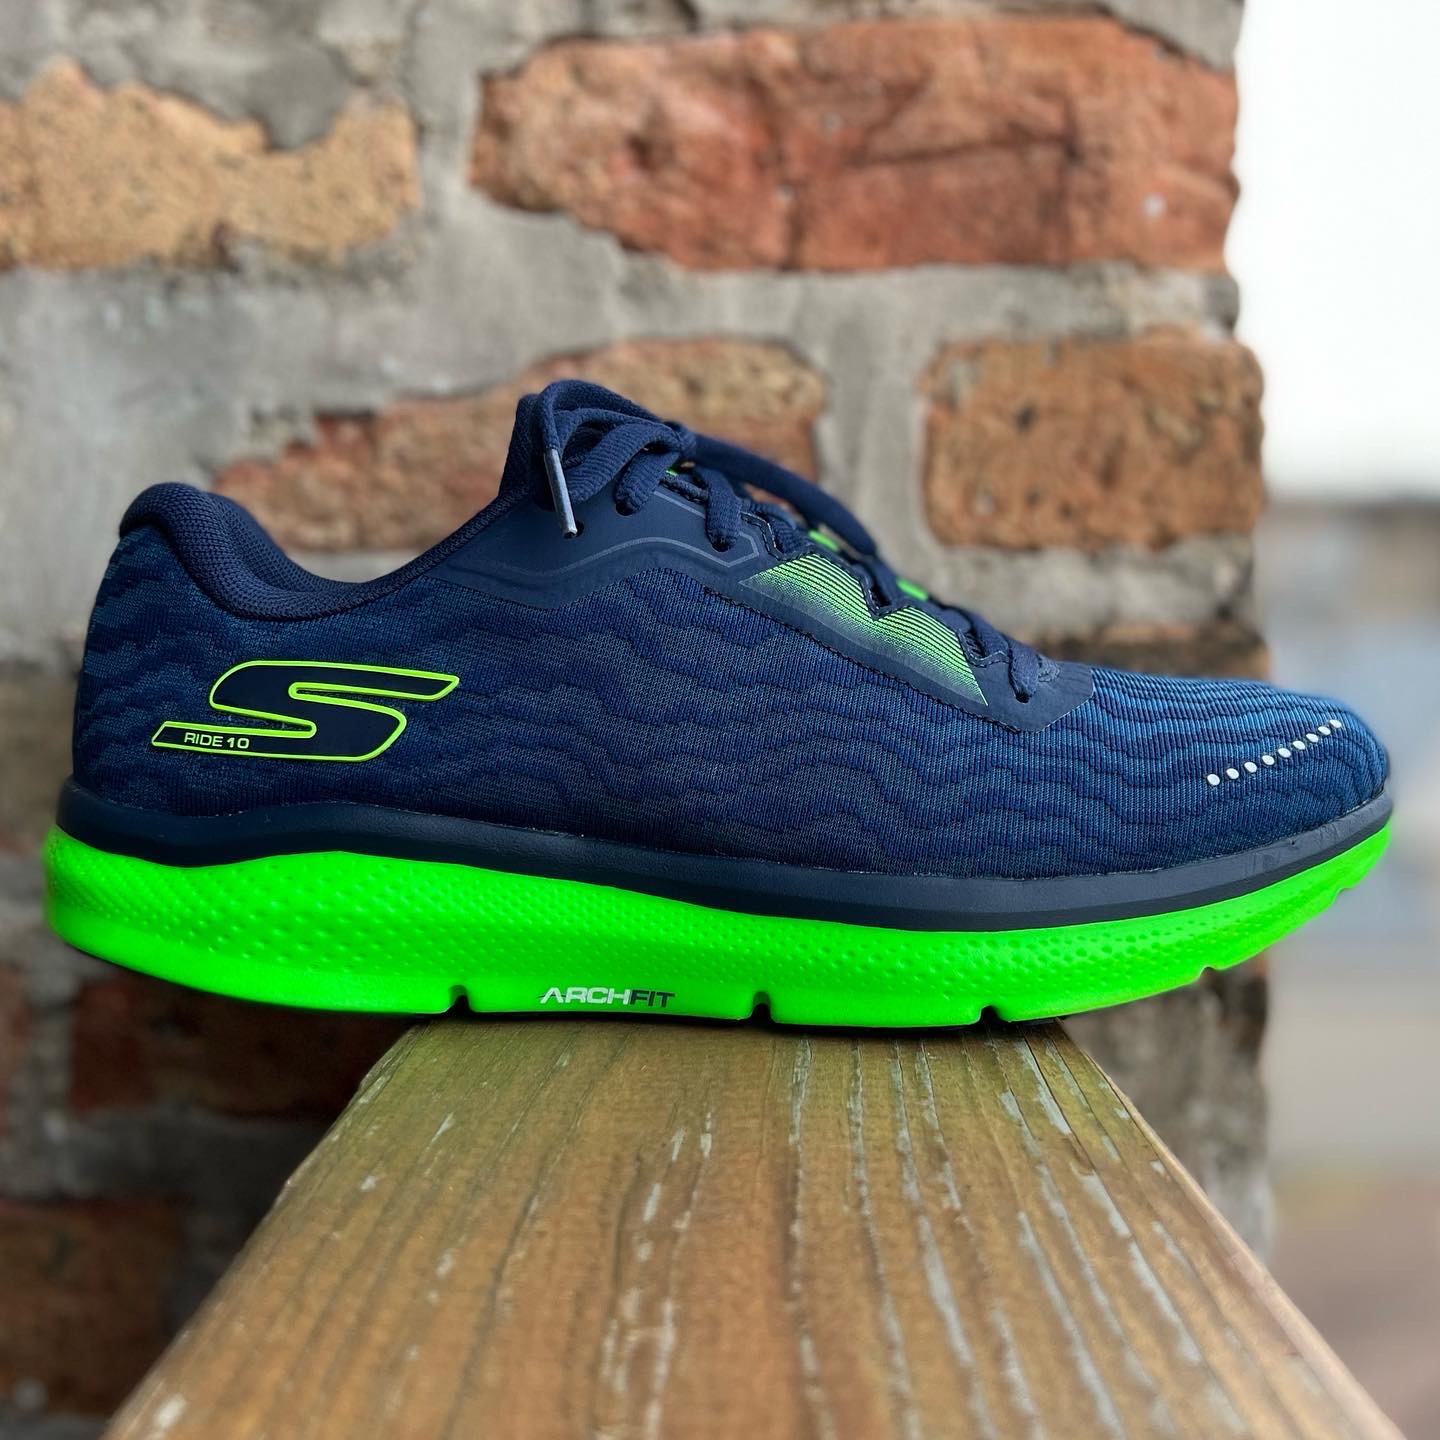 Road Trail Run: Skechers Performance GO Run Ride 10 Multi Tester Review at 50 Miles Plus: A Light Everyday Trainer